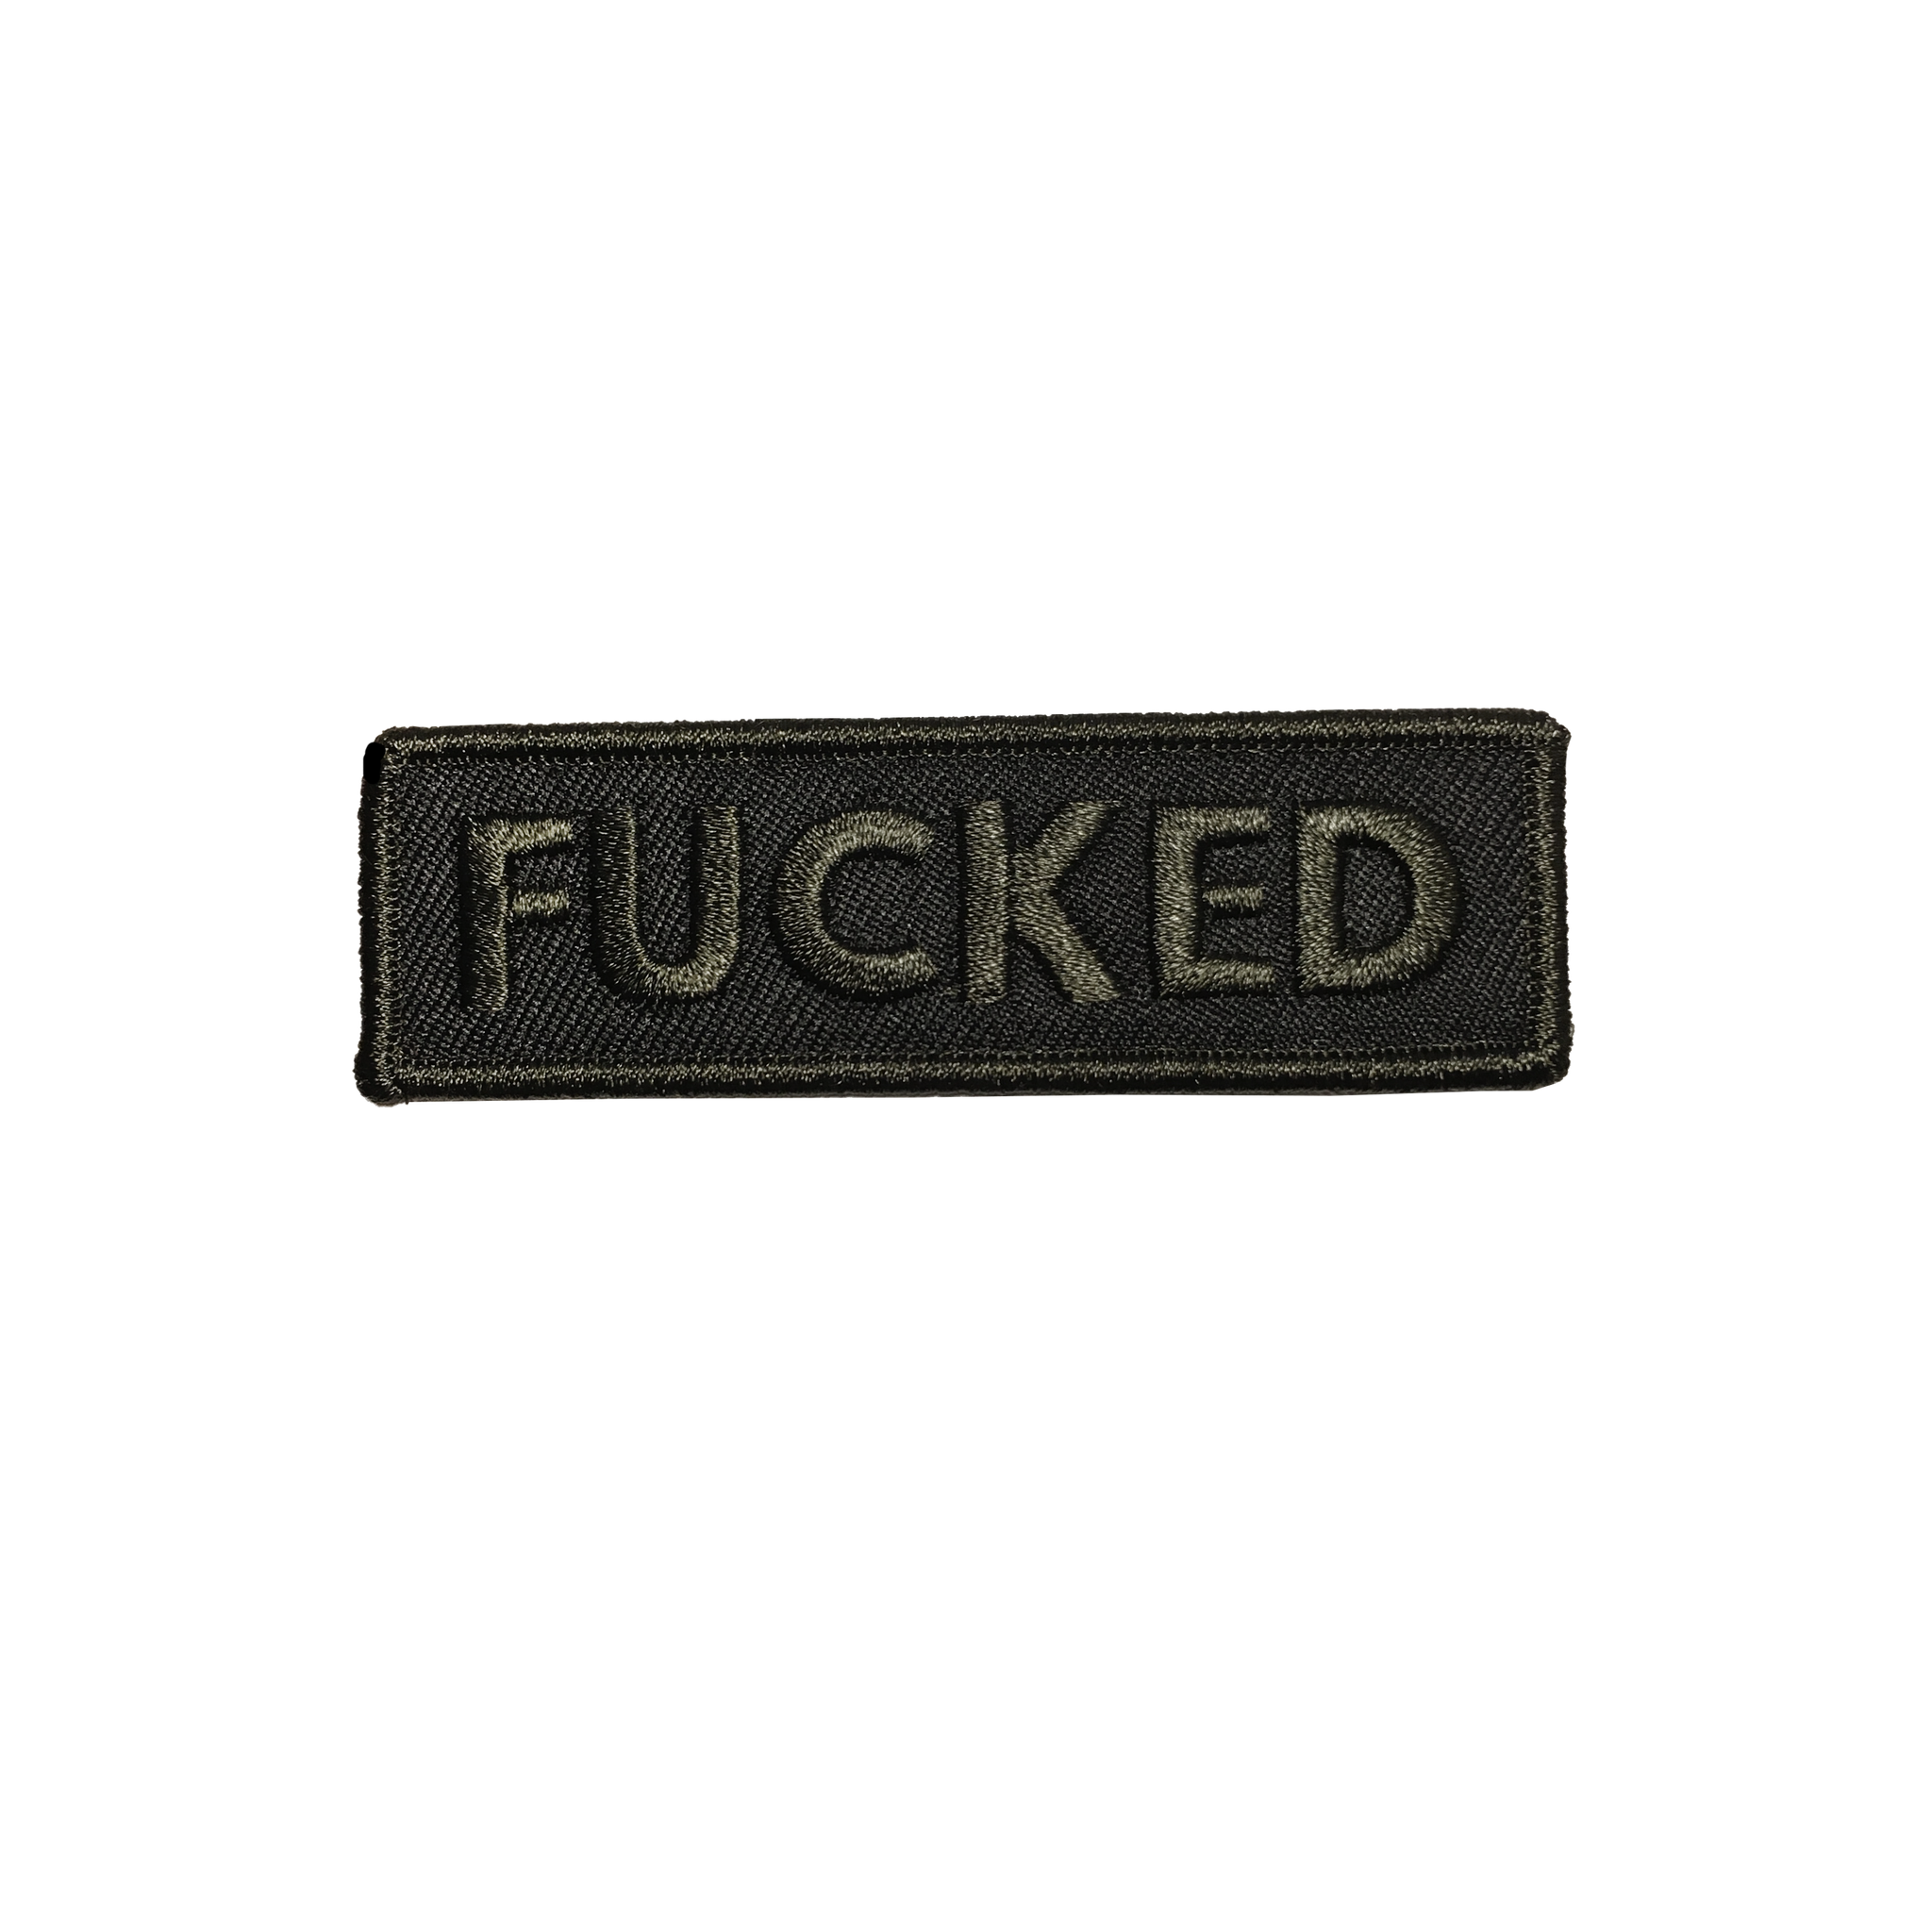 A rectangular embroidered patch with a black background and brownish black border with the word “FUCKED” in capital letters in that same brownish black 